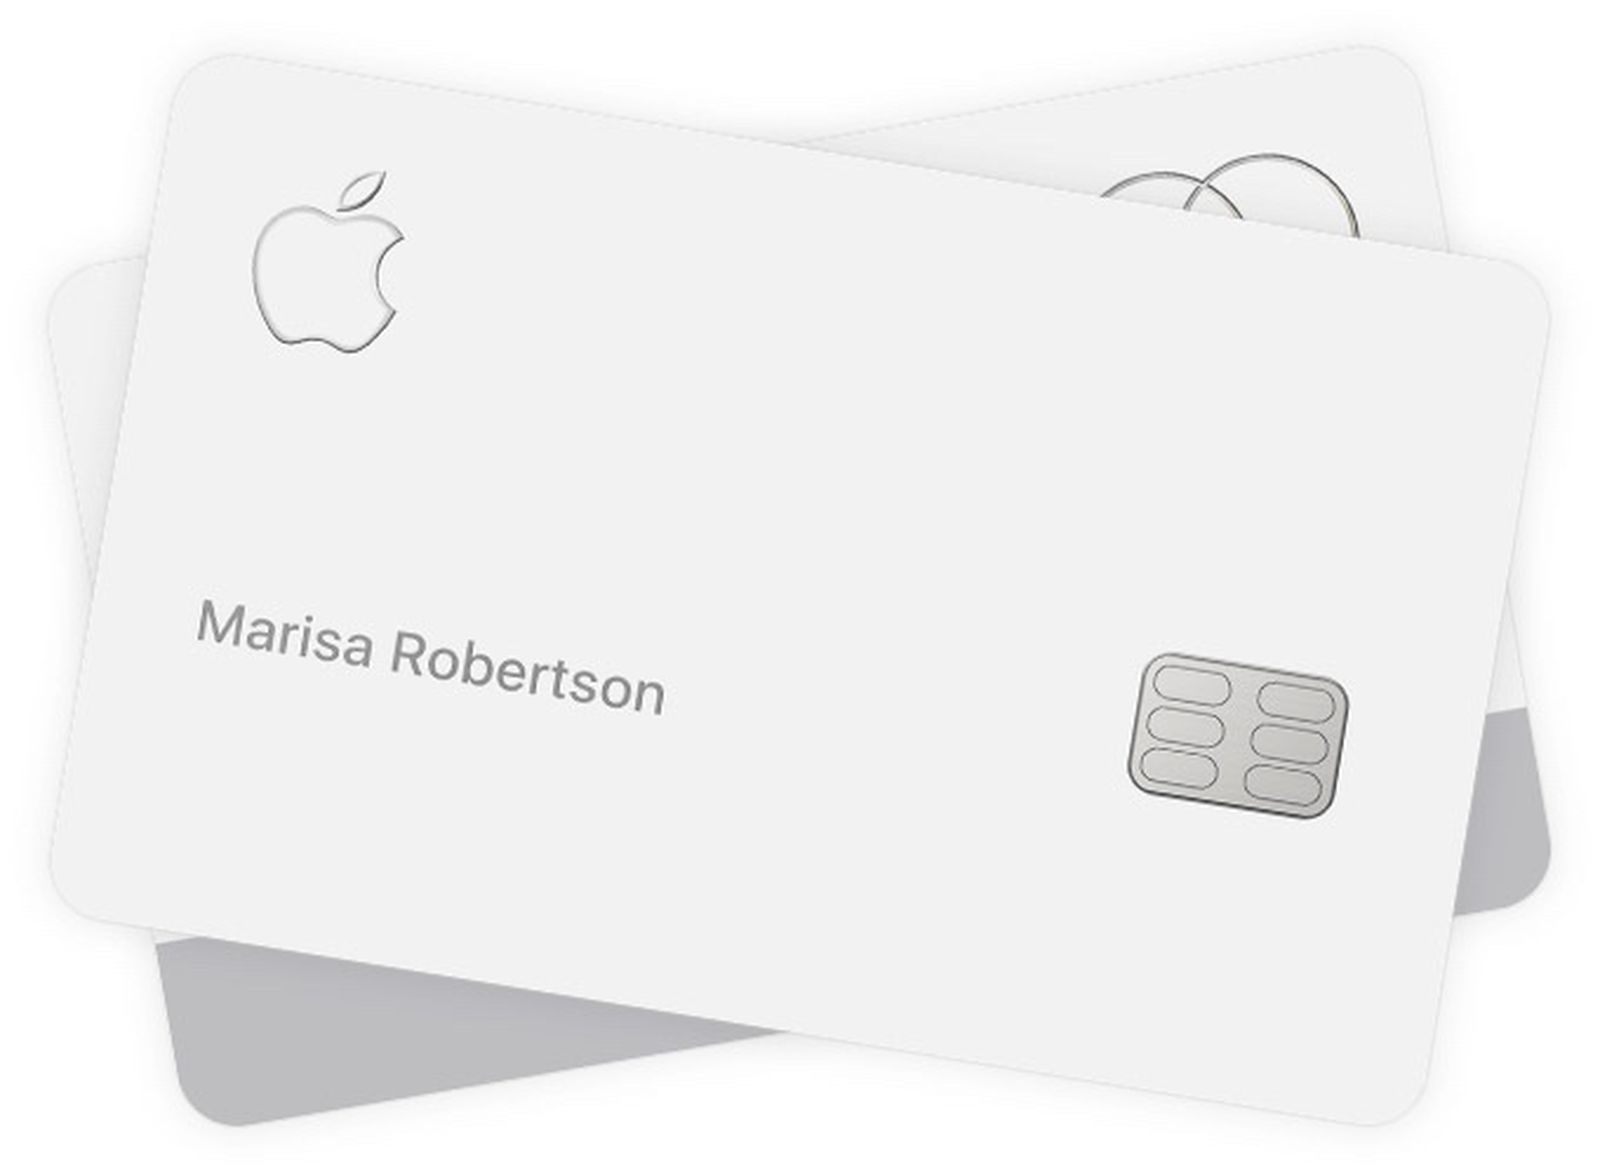 How to Request a New Apple Card Number - MacRumors